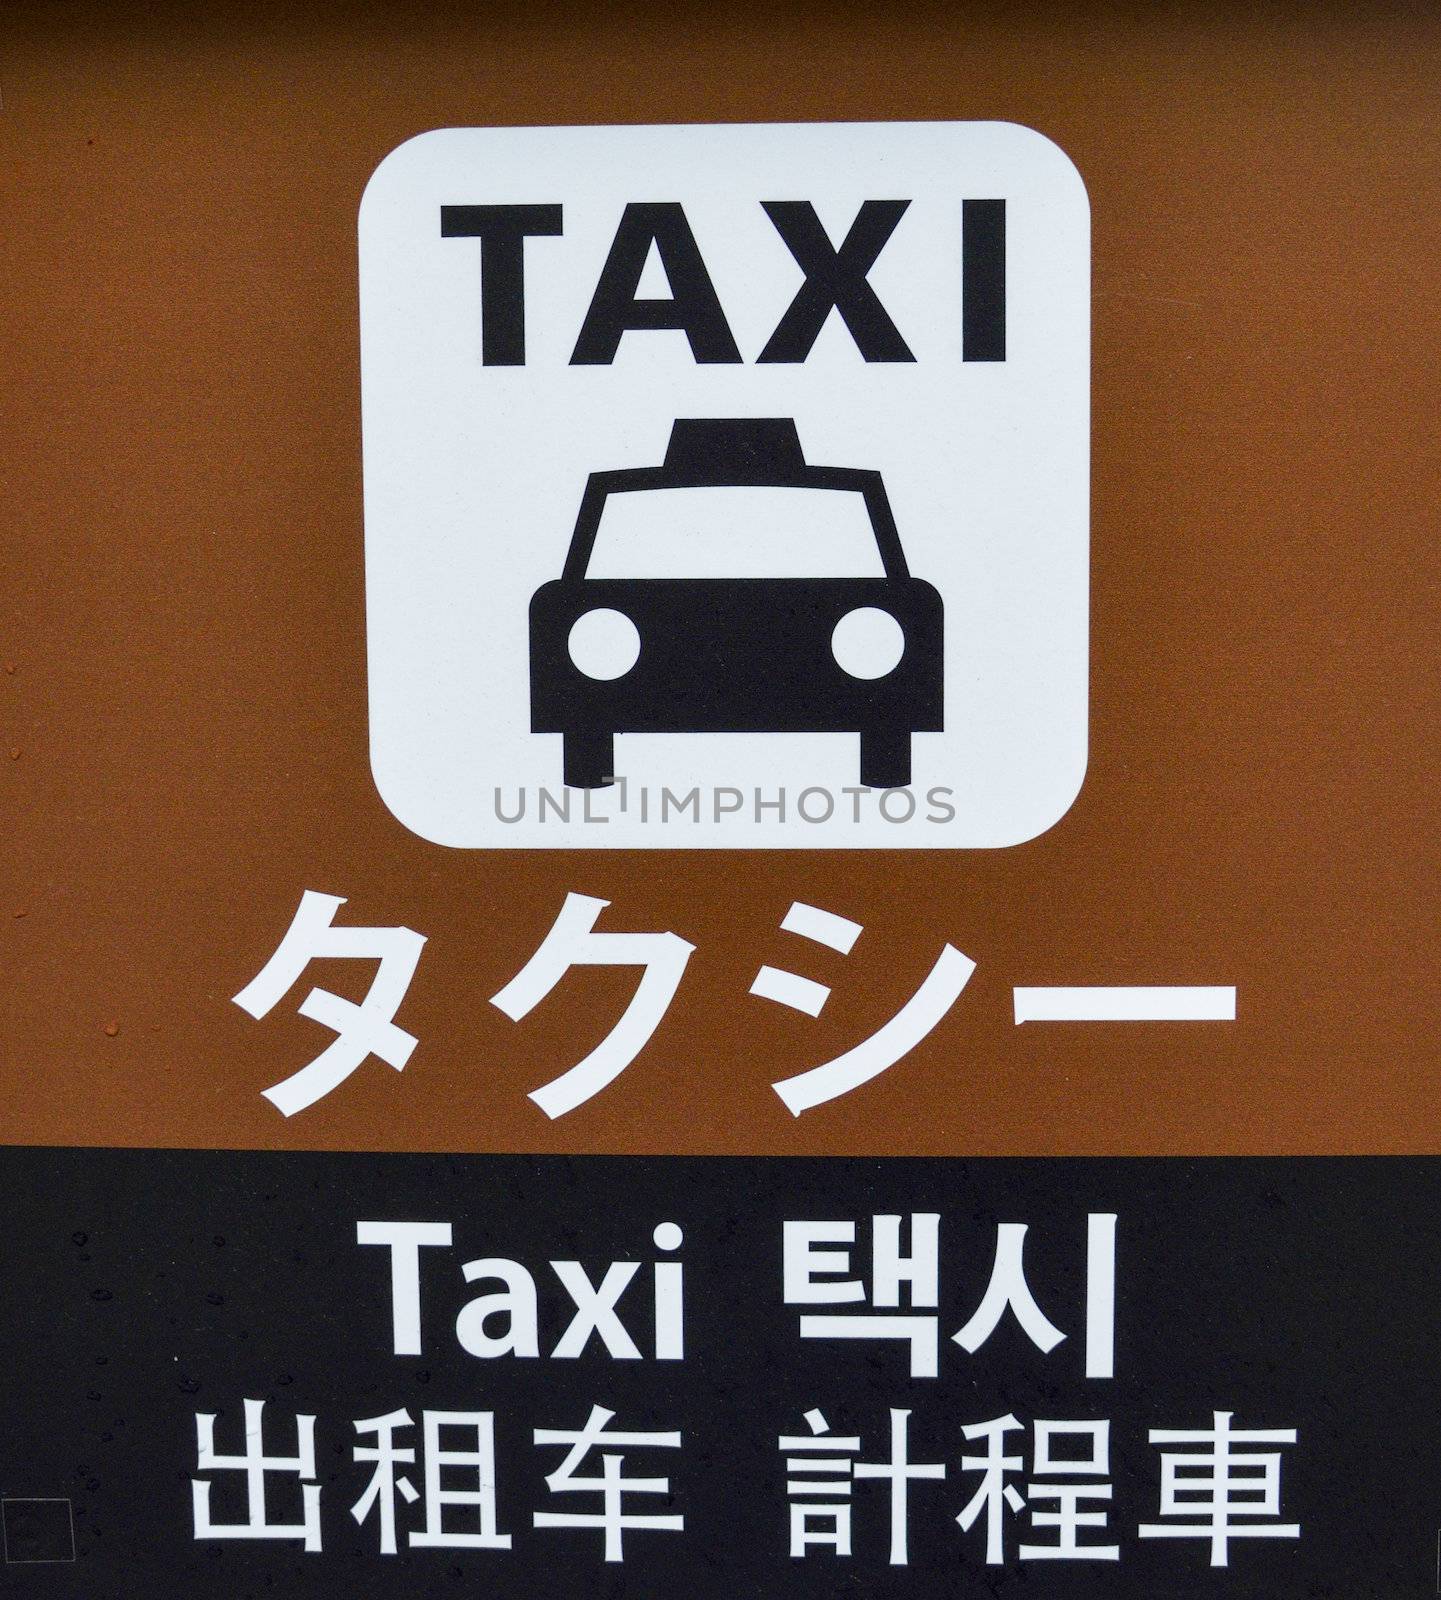 Taxi stop sign in Japan